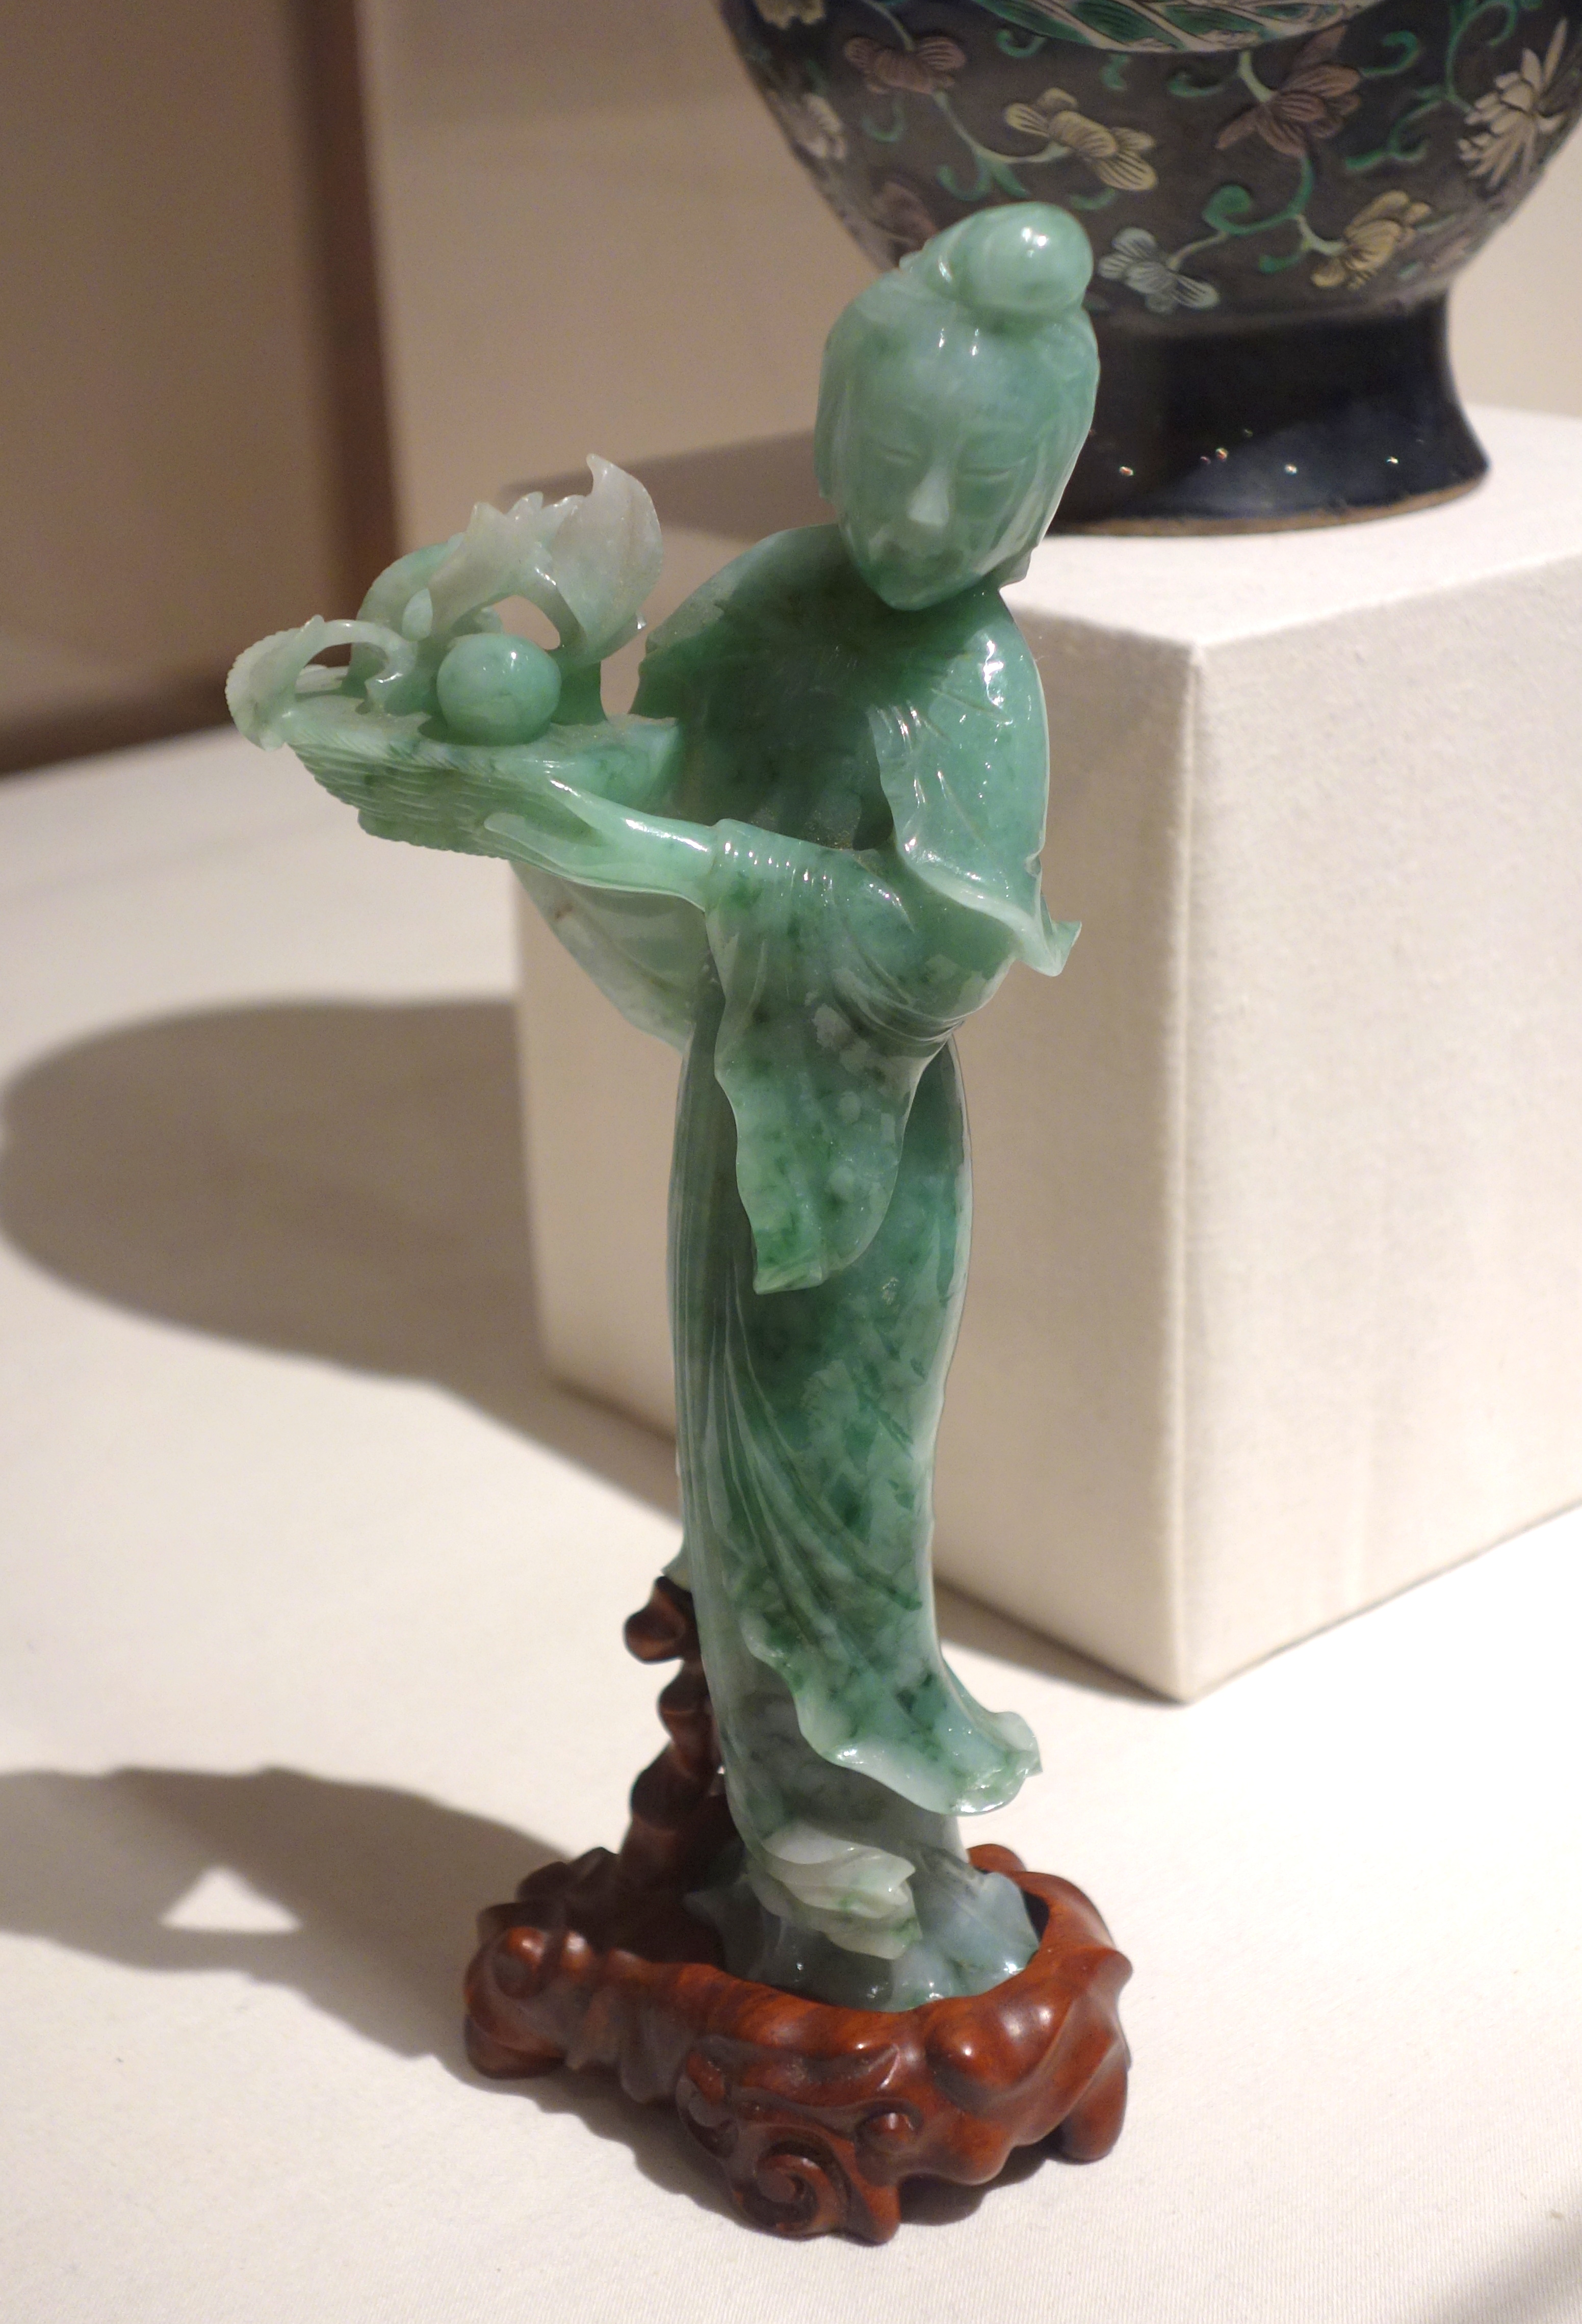 Chinese Figure of Lan Caihe Qing Dynasty Daoguang Period 1821-1850 jadeite - Huntington Museum of Art - DSC05256